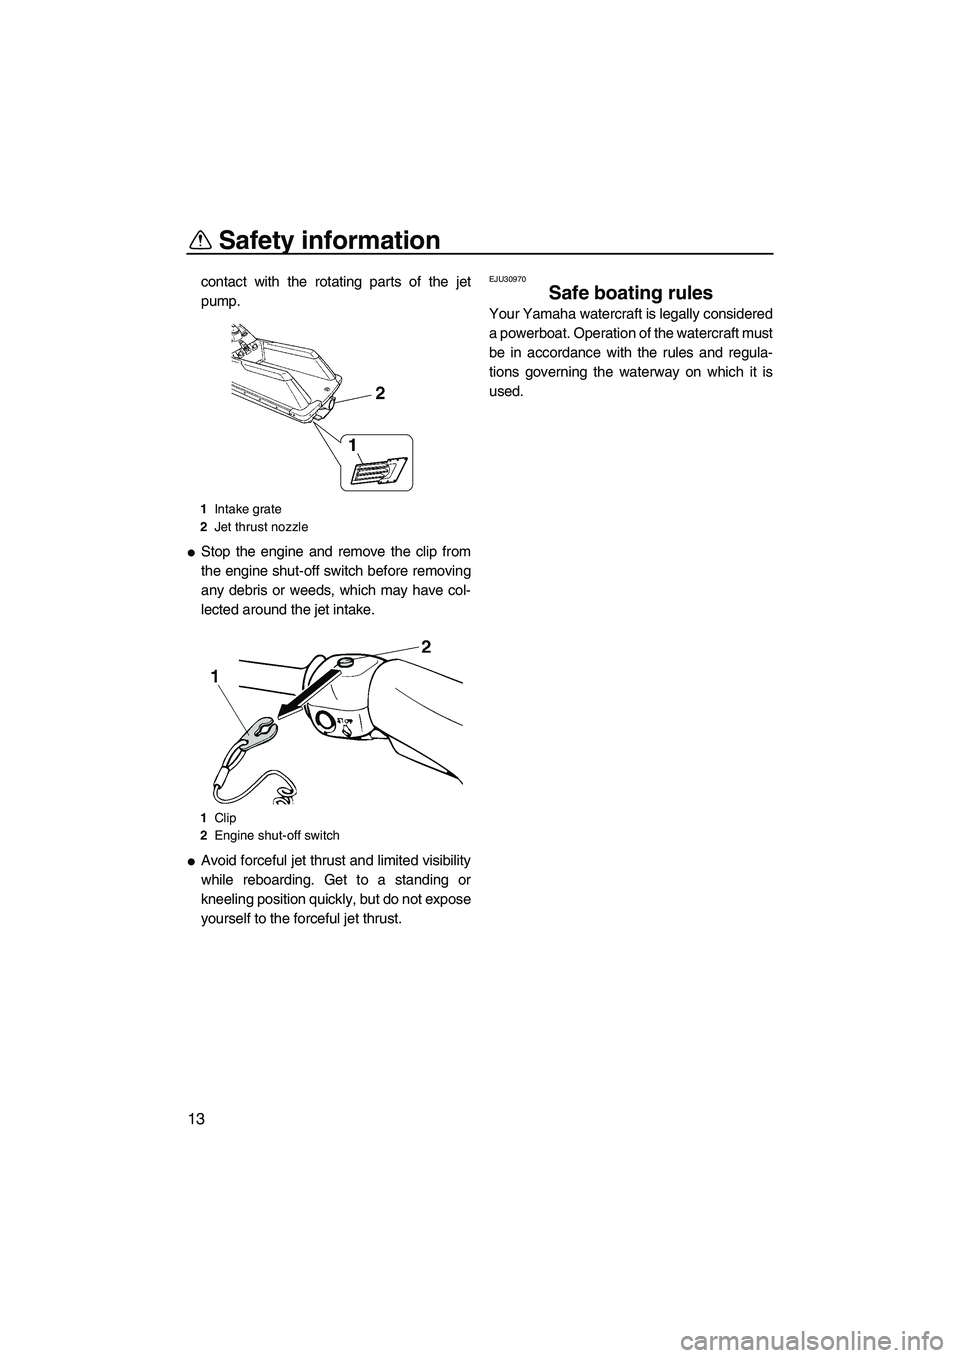 YAMAHA SUPERJET 2010  Owners Manual Safety information
13
contact with the rotating parts of the jet
pump.
Stop the engine and remove the clip from
the engine shut-off switch before removing
any debris or weeds, which may have col-
lec